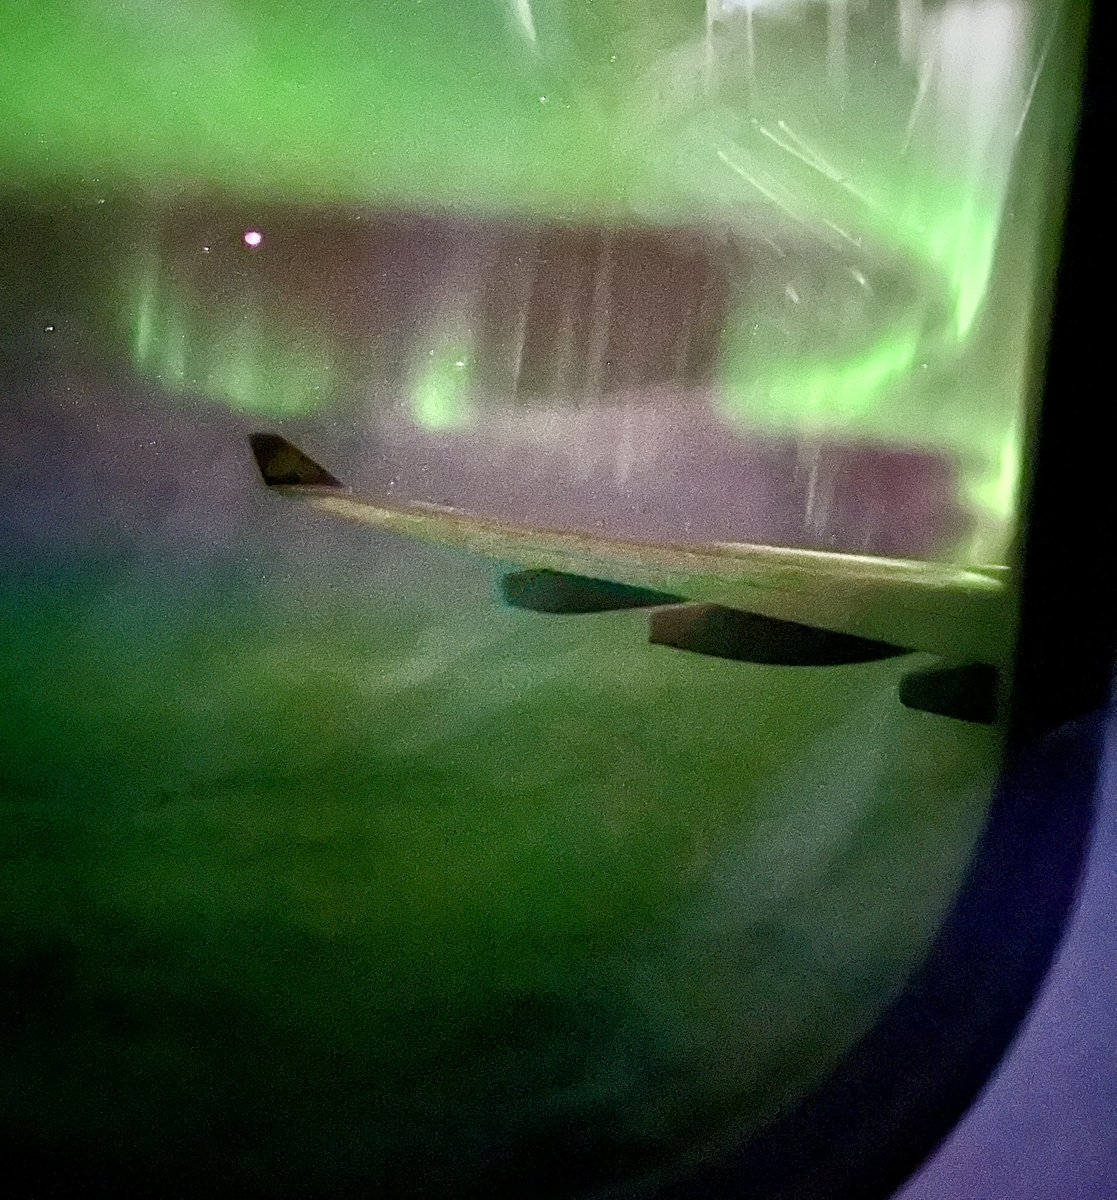 Aurora Borealis seen from the plane journey SF to DUB on 11th Nov. First time I’ve seen the Northern Lights. What a sight! #northernlights #AuroraBorealis #Flights